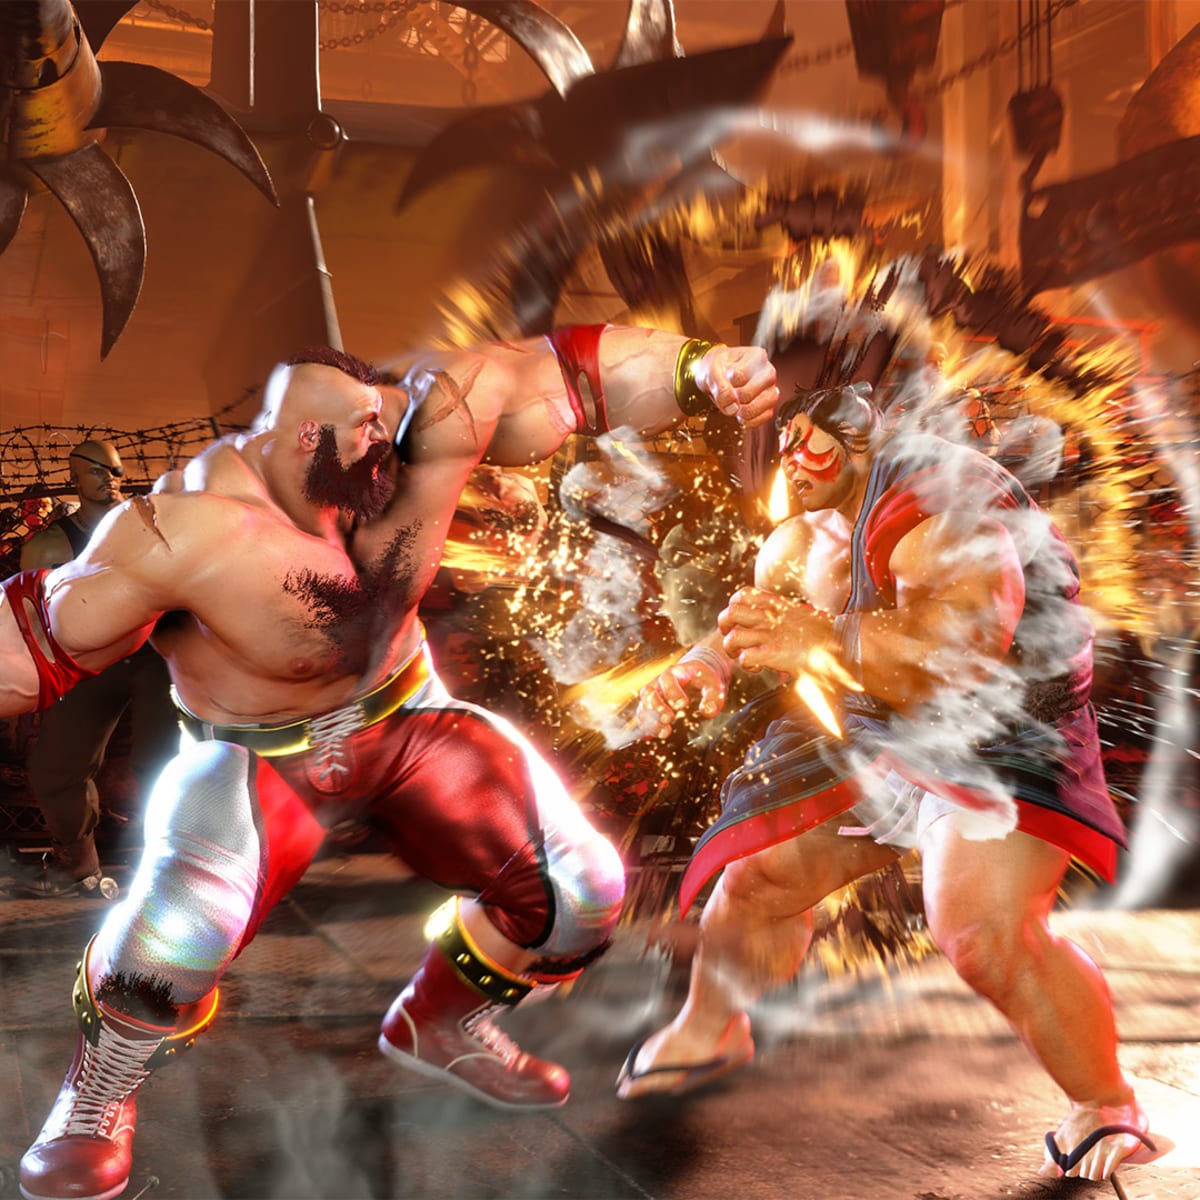 Zangief Street Fighter 5: Champion Edition moves list, strategy